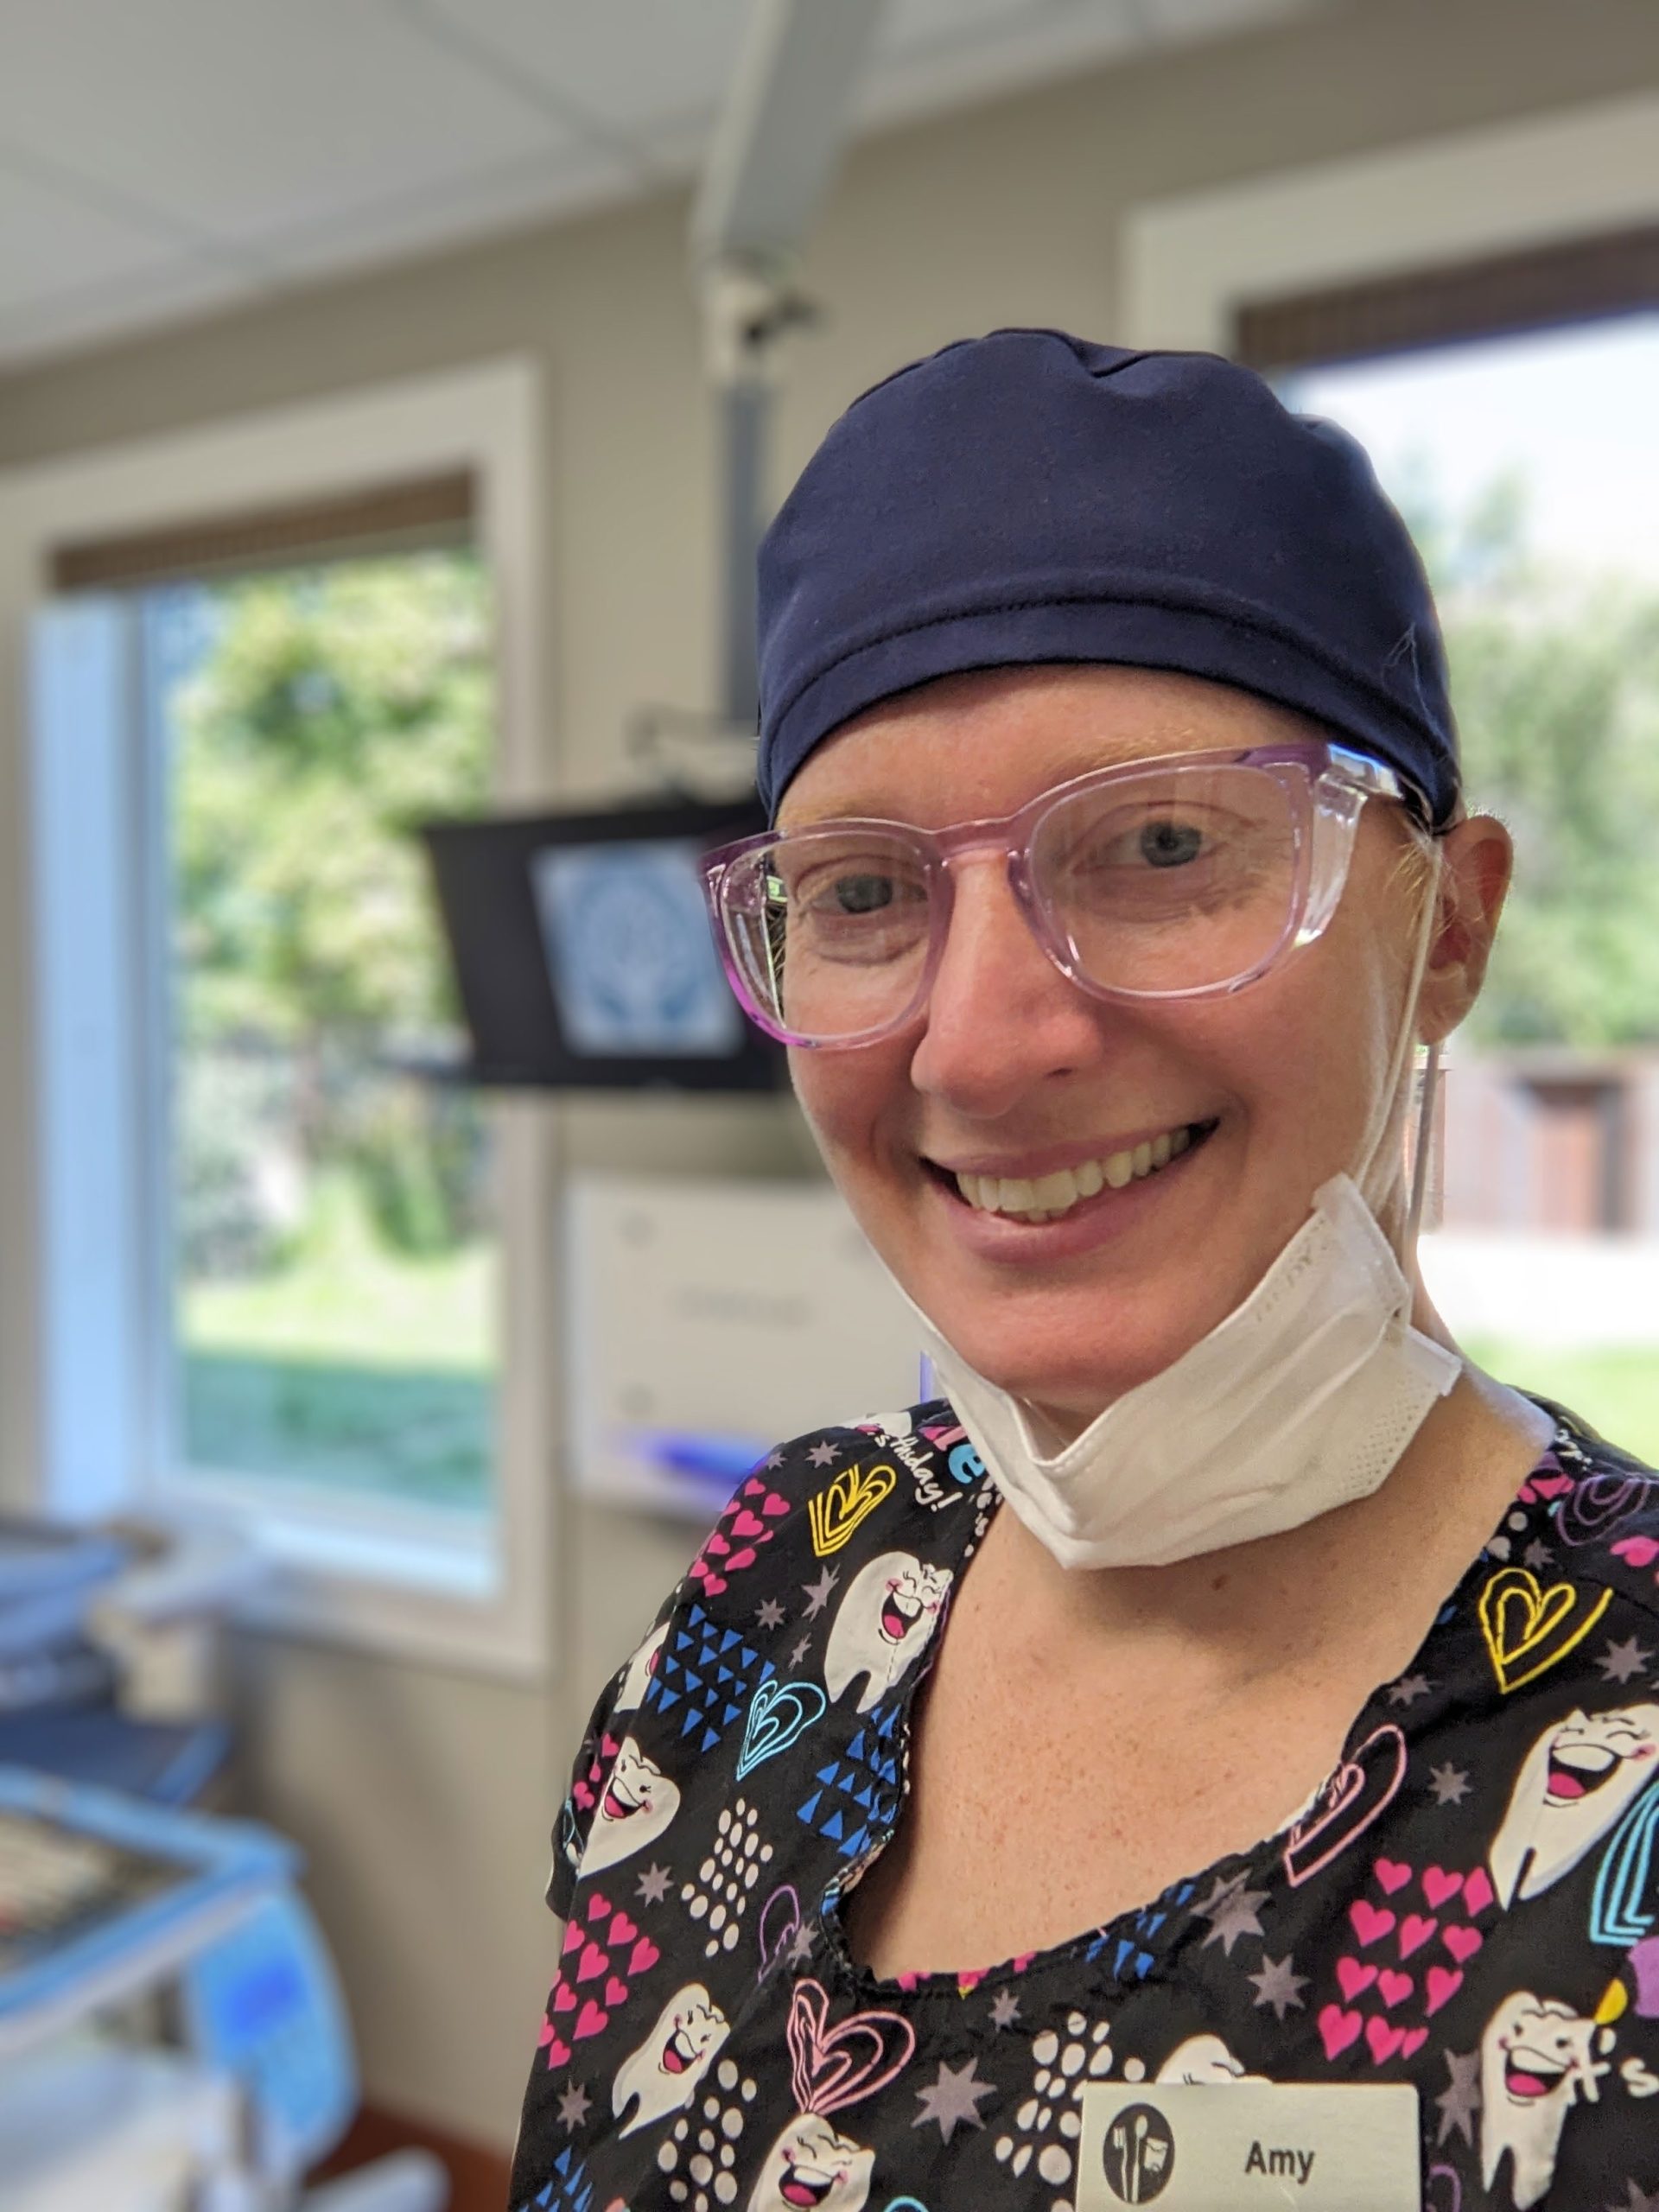 WorkBC Assistive Technology Services participant Amy, wearing a surgical mask and cap.